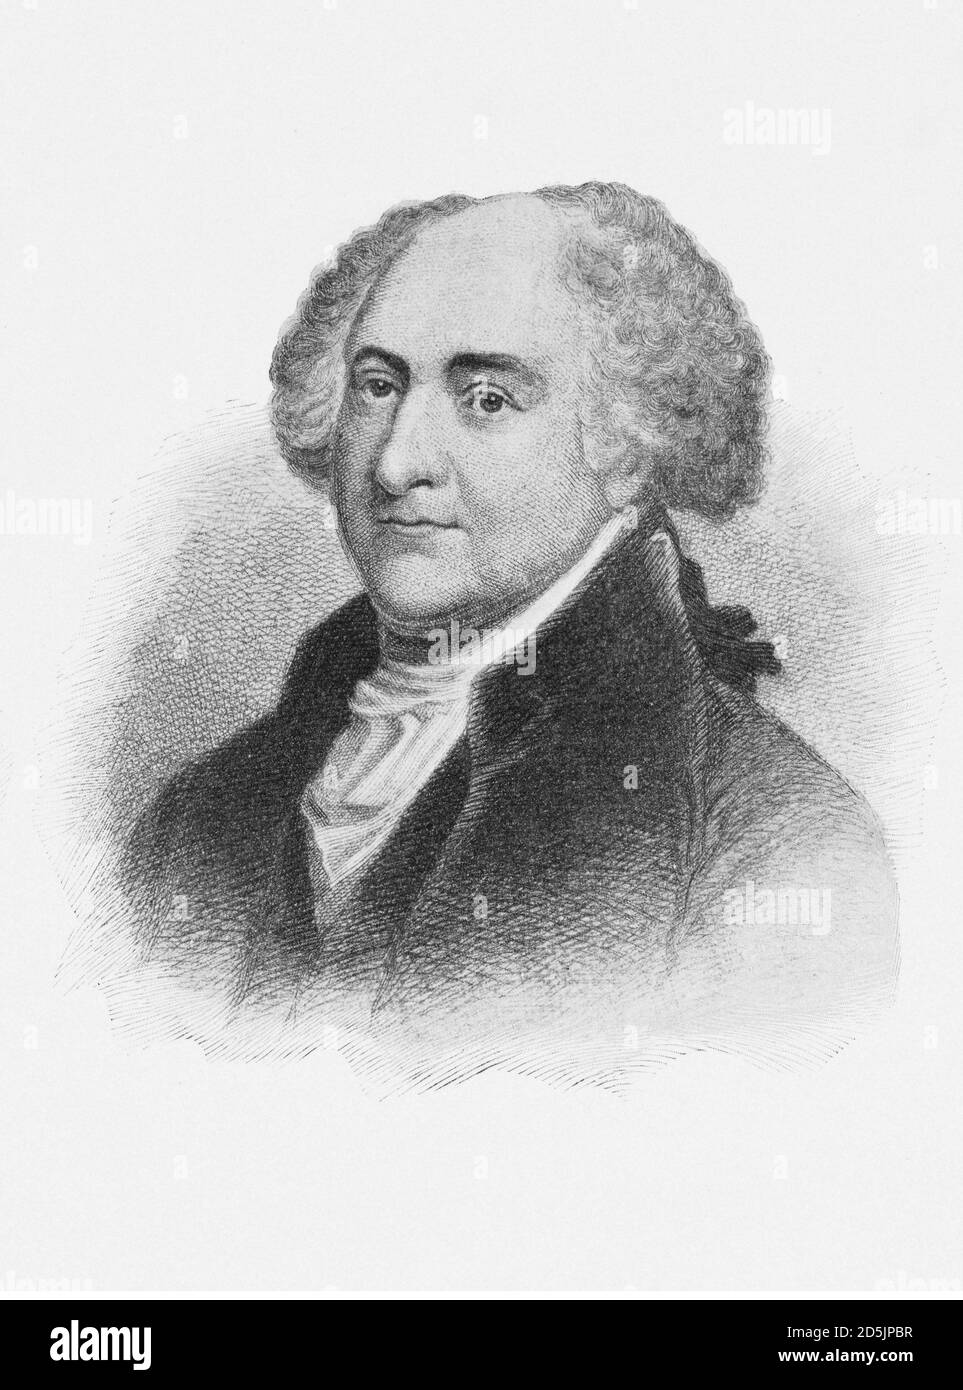 Portrait of president of John Adams. John Adams (1735 – 1826) was an American statesman, attorney, diplomat, writer, and Founding Father who served as Stock Photo